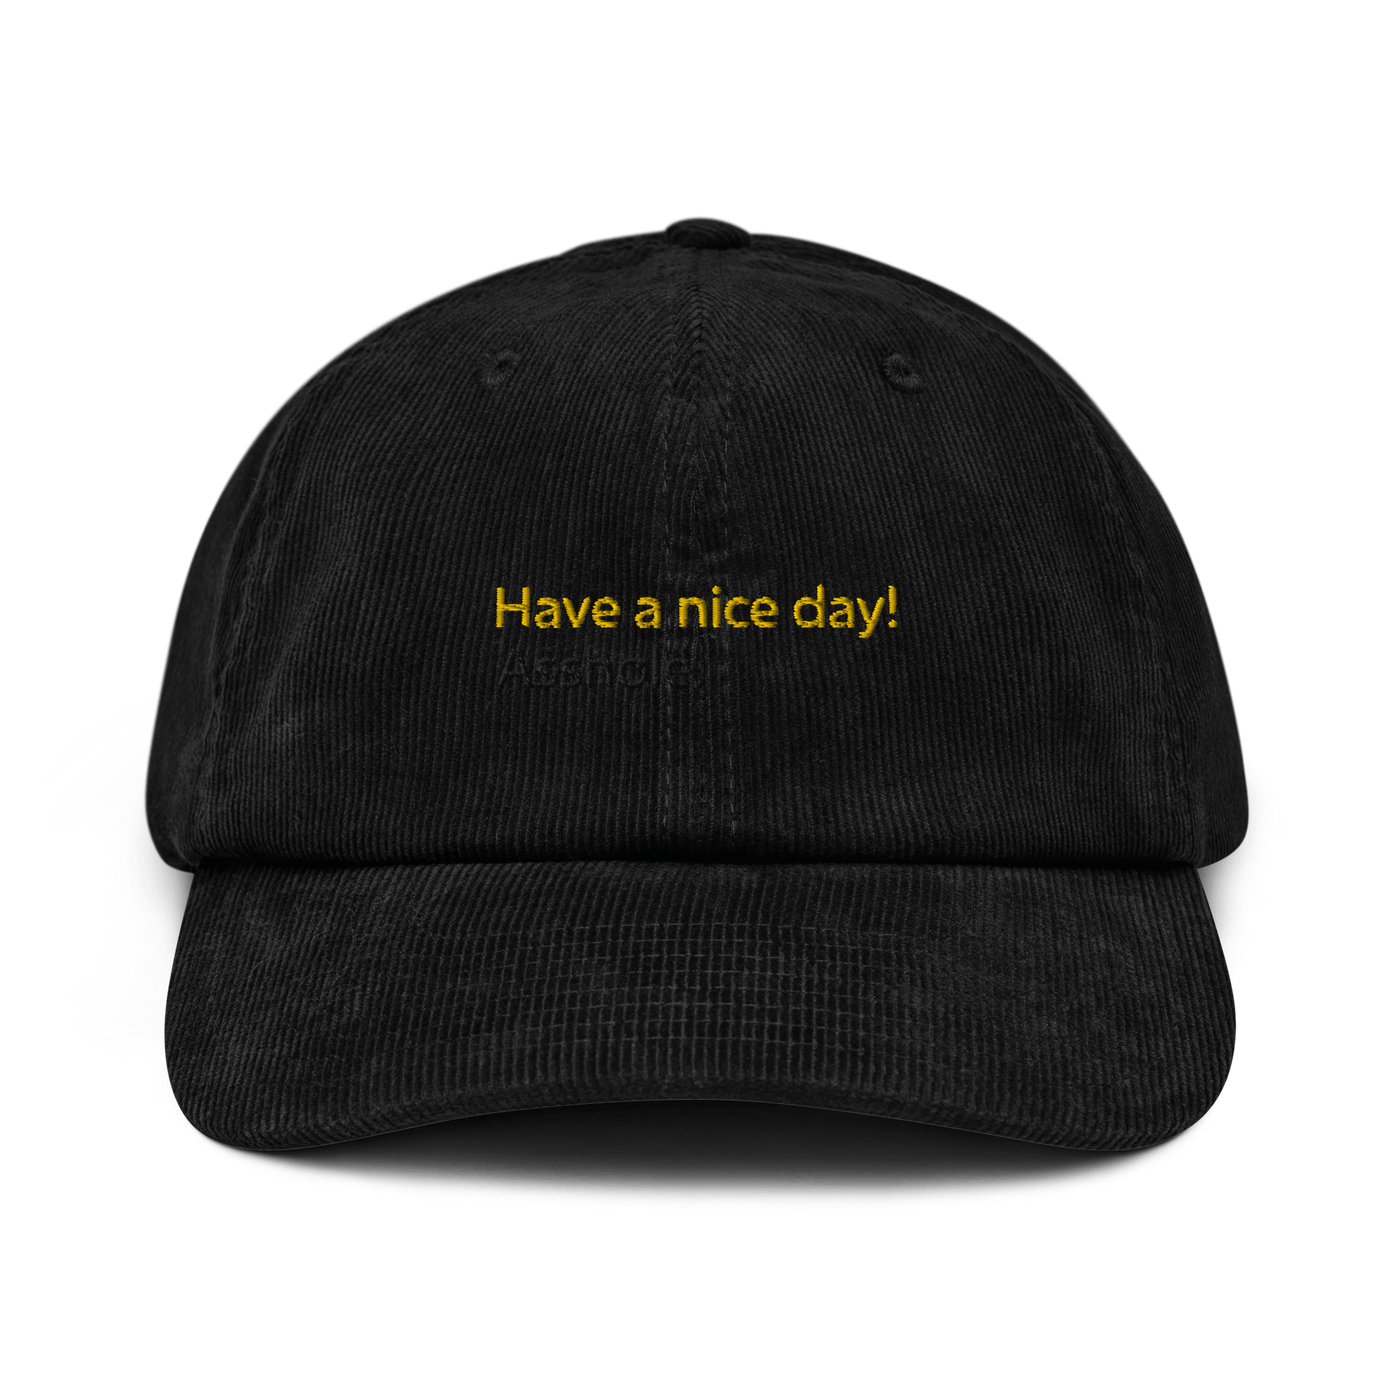 Have a nice day! (asshole) Corduroy hat - Black - - Just Another Cap Store